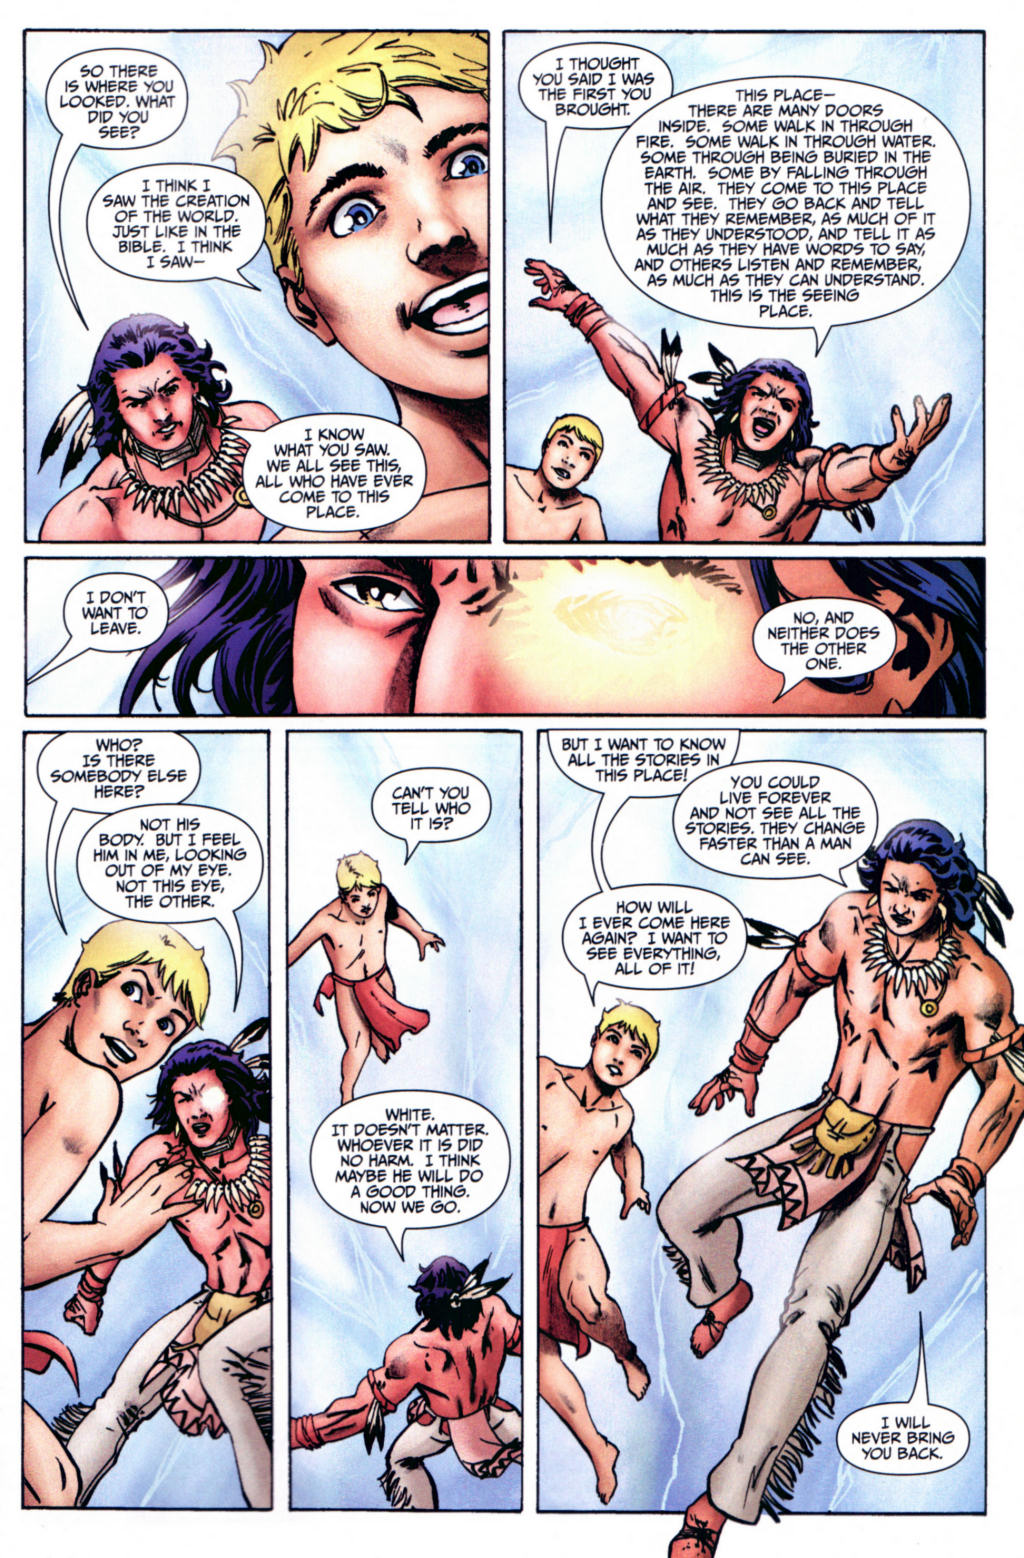 Red Prophet: The Tales of Alvin Maker issue 6 - Page 21